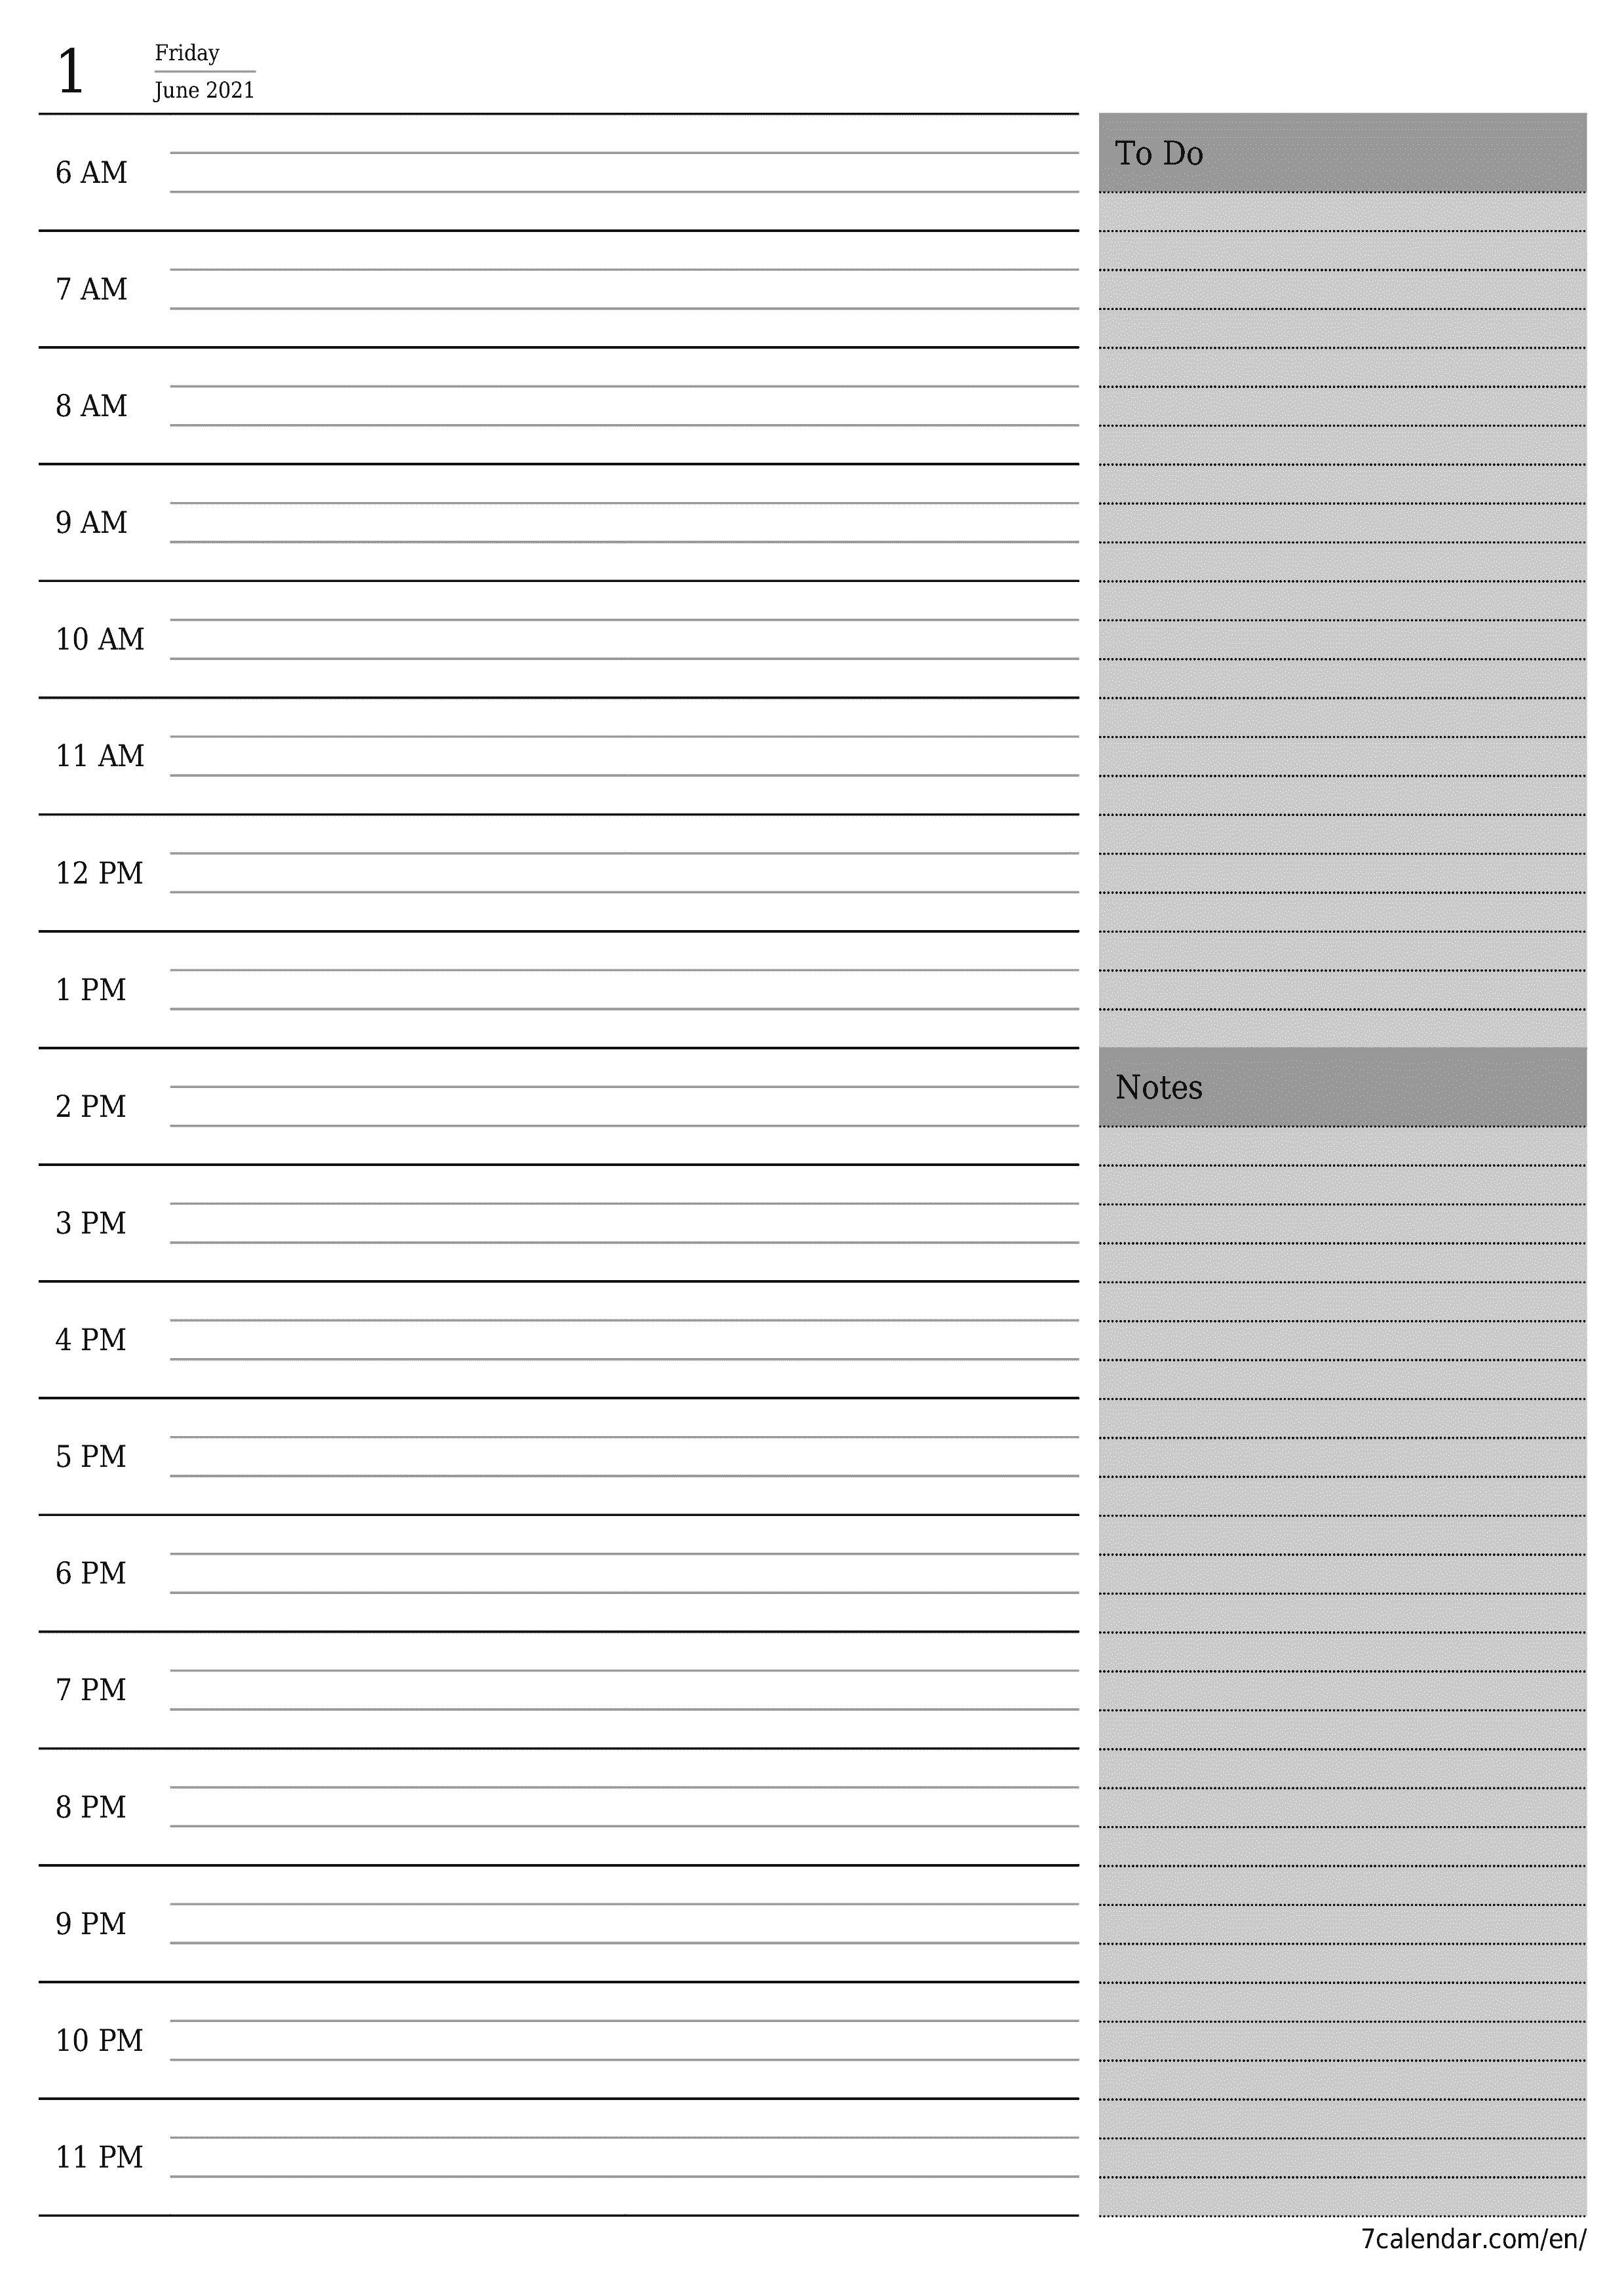 Blank daily calendar planner for day June 2021 with notes, save and print to PDF PNG English - 7calendar.com